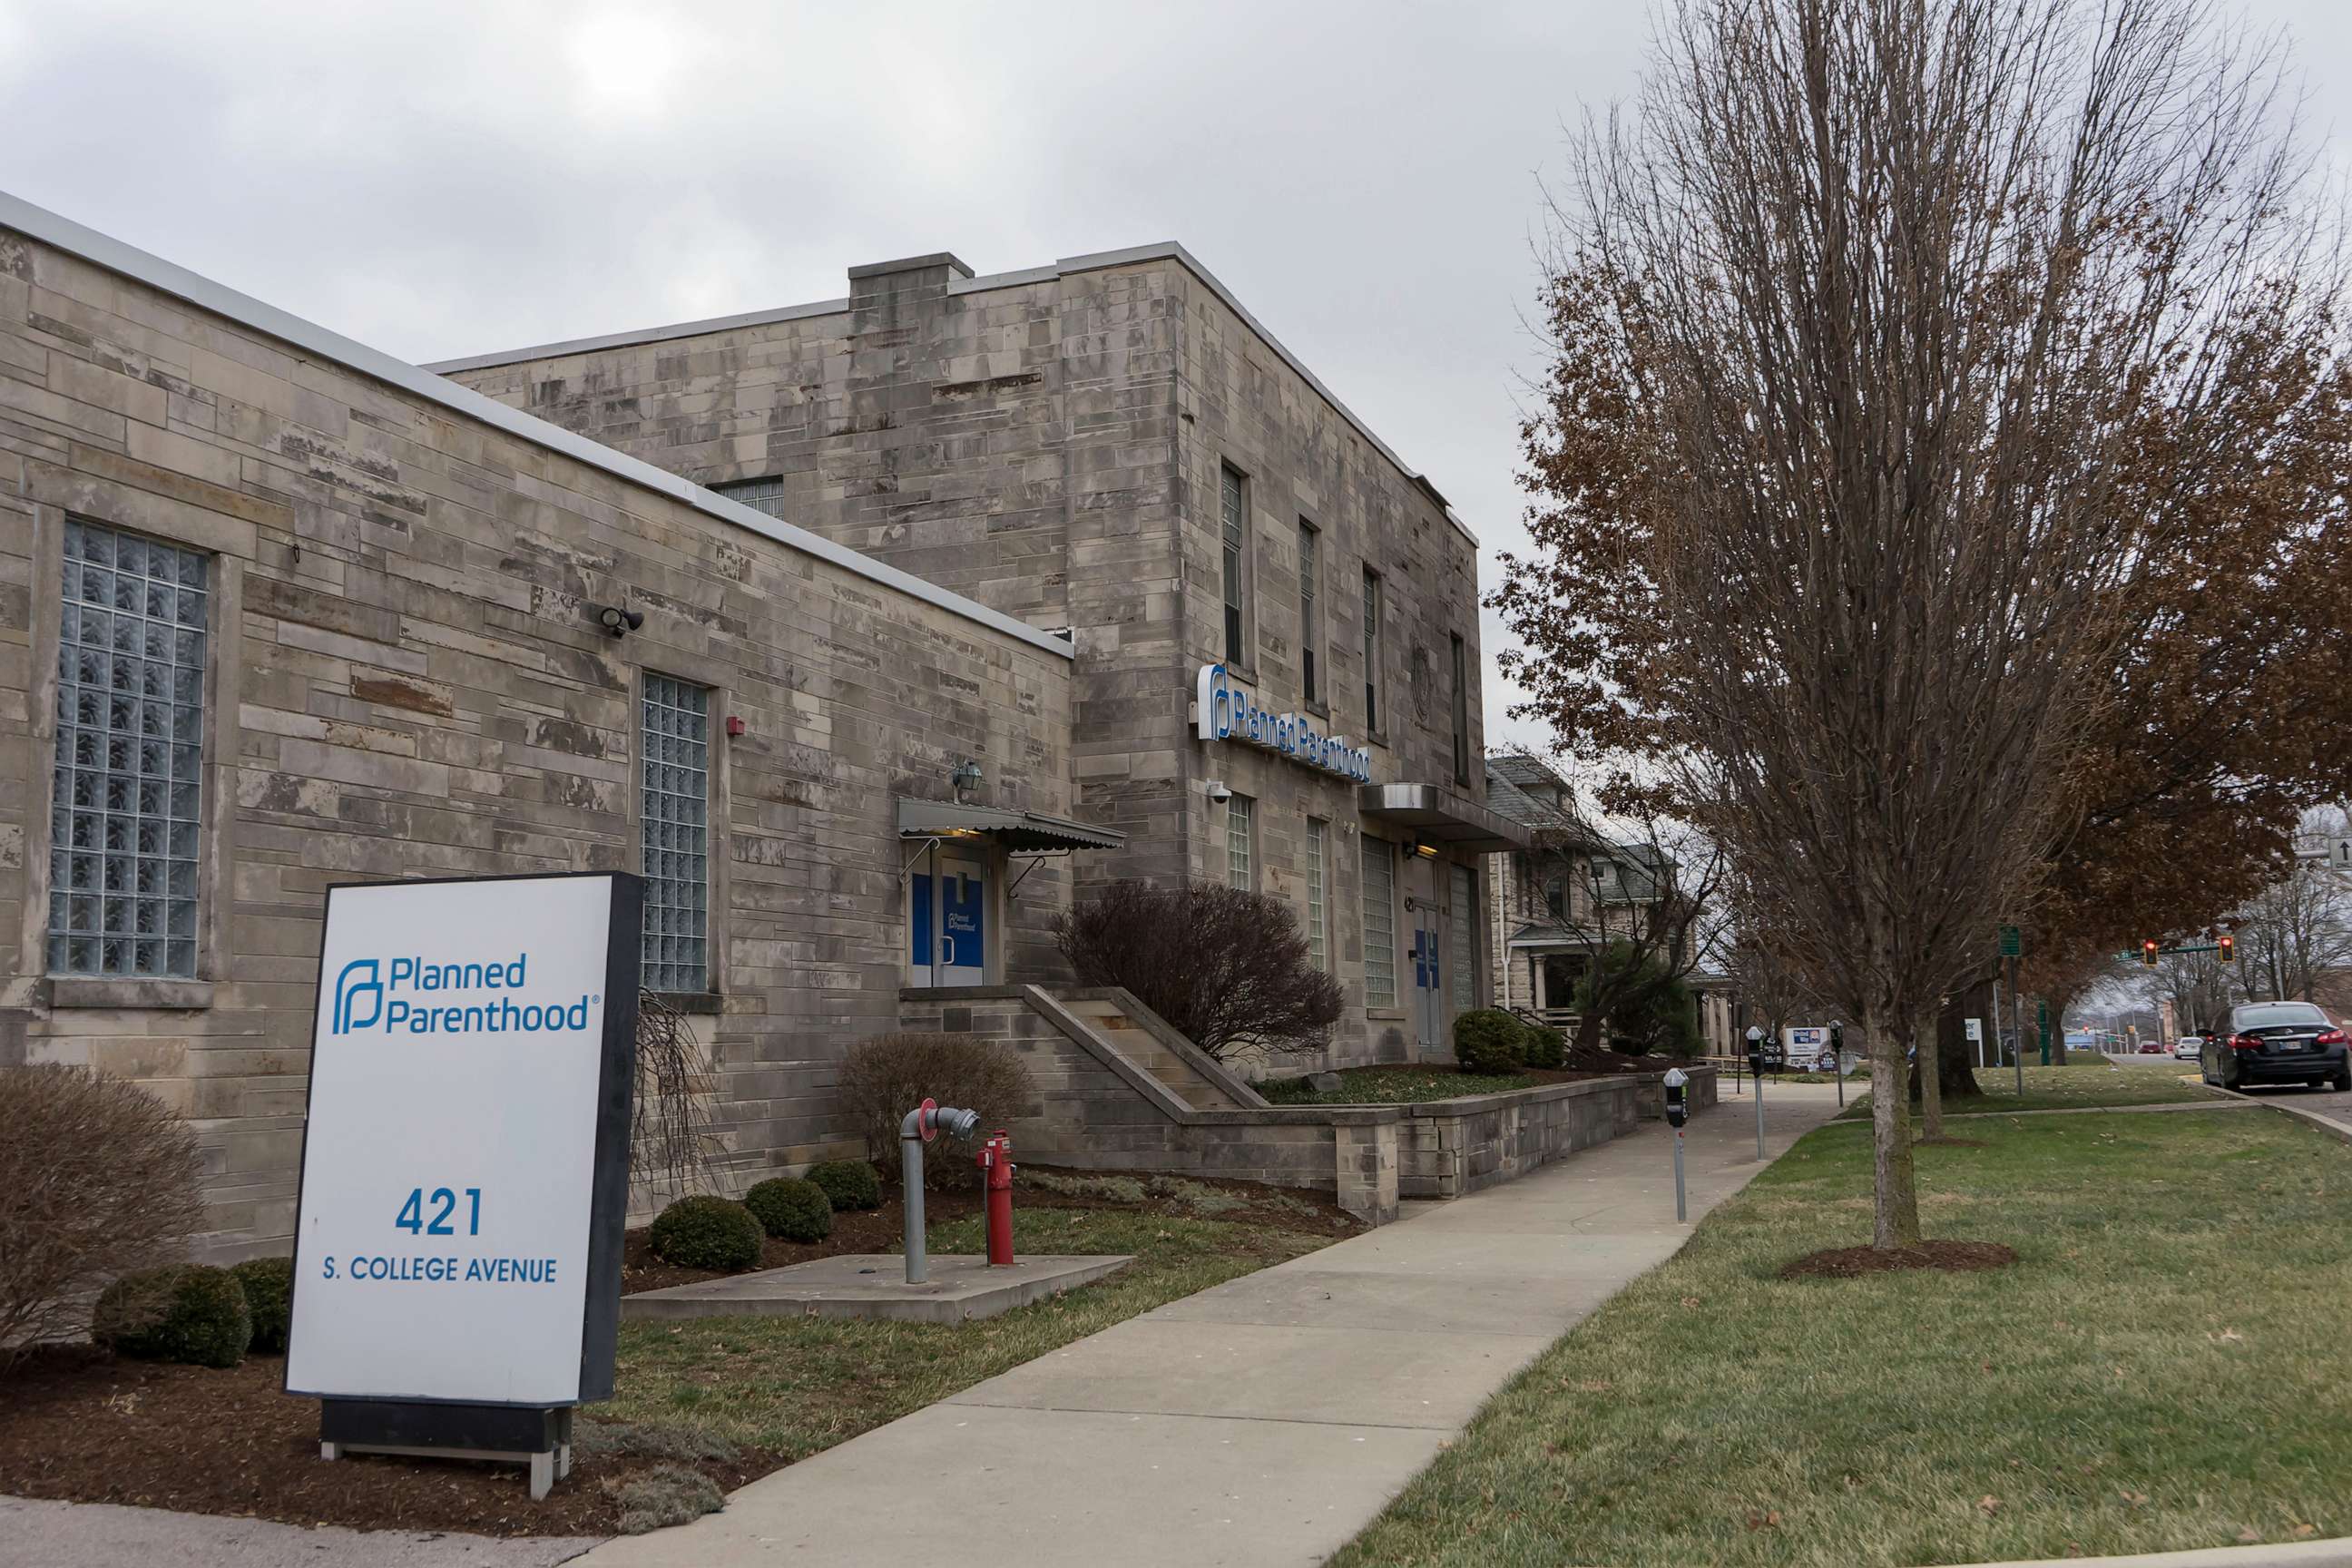 PHOTO: In this Jan. 9, 2021, file photo, a Planned Parenthood location is shown in Bloomington, Indiana.